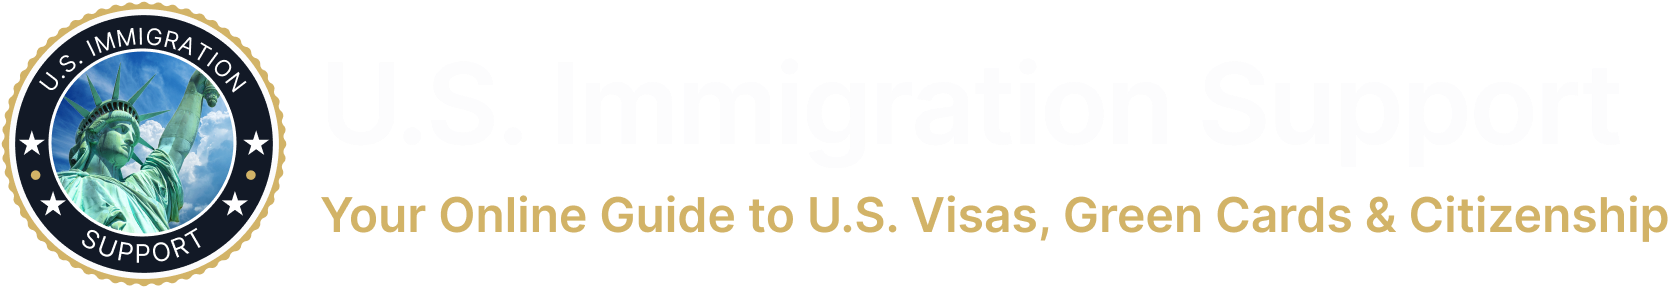 US Immigration support